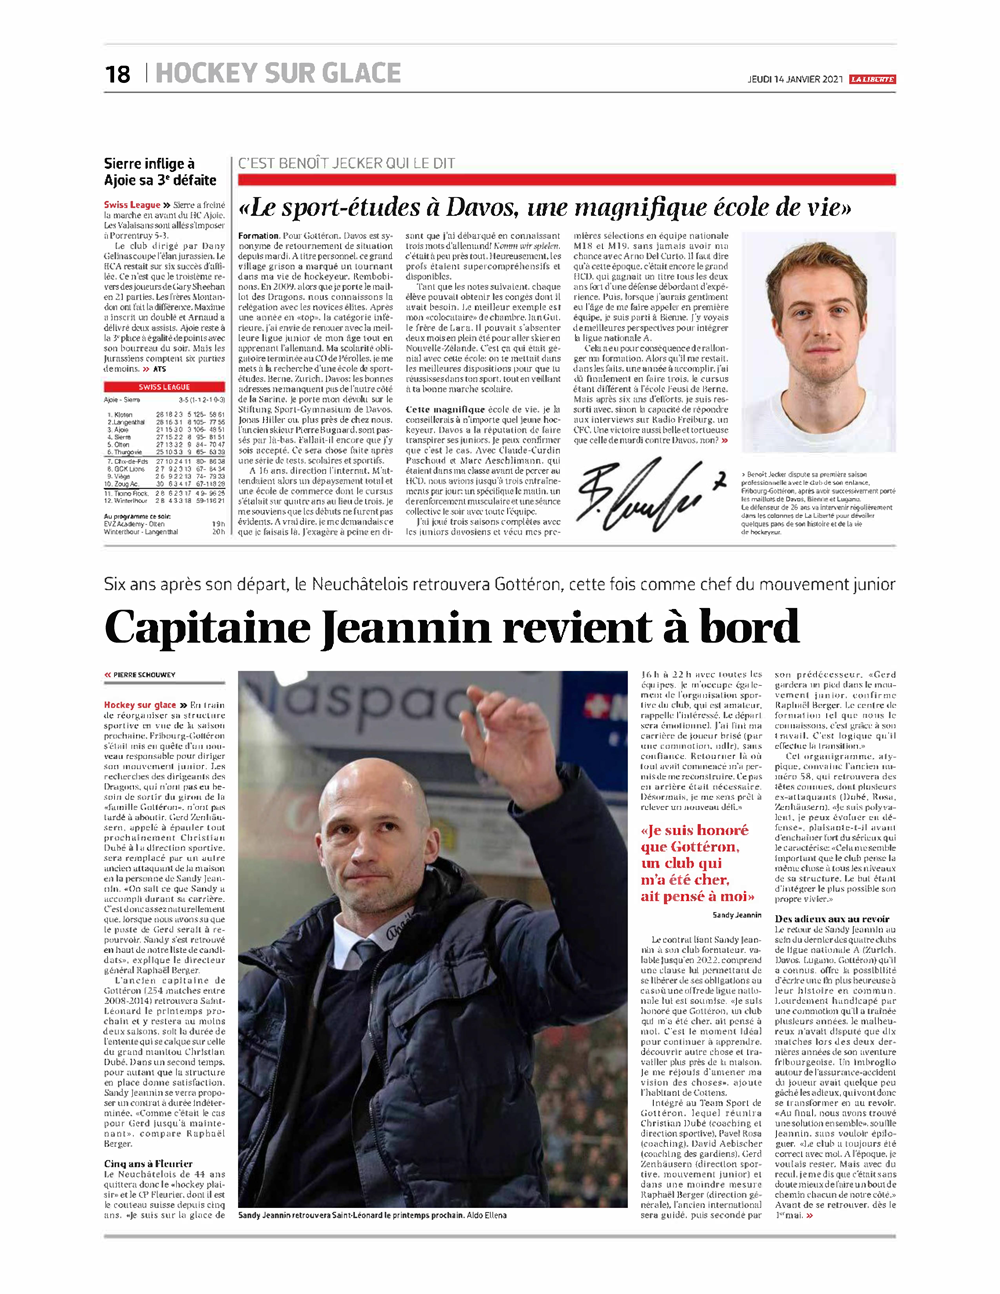 20210114-Capitaine-Jeannin-revient-a-bord-(1).png